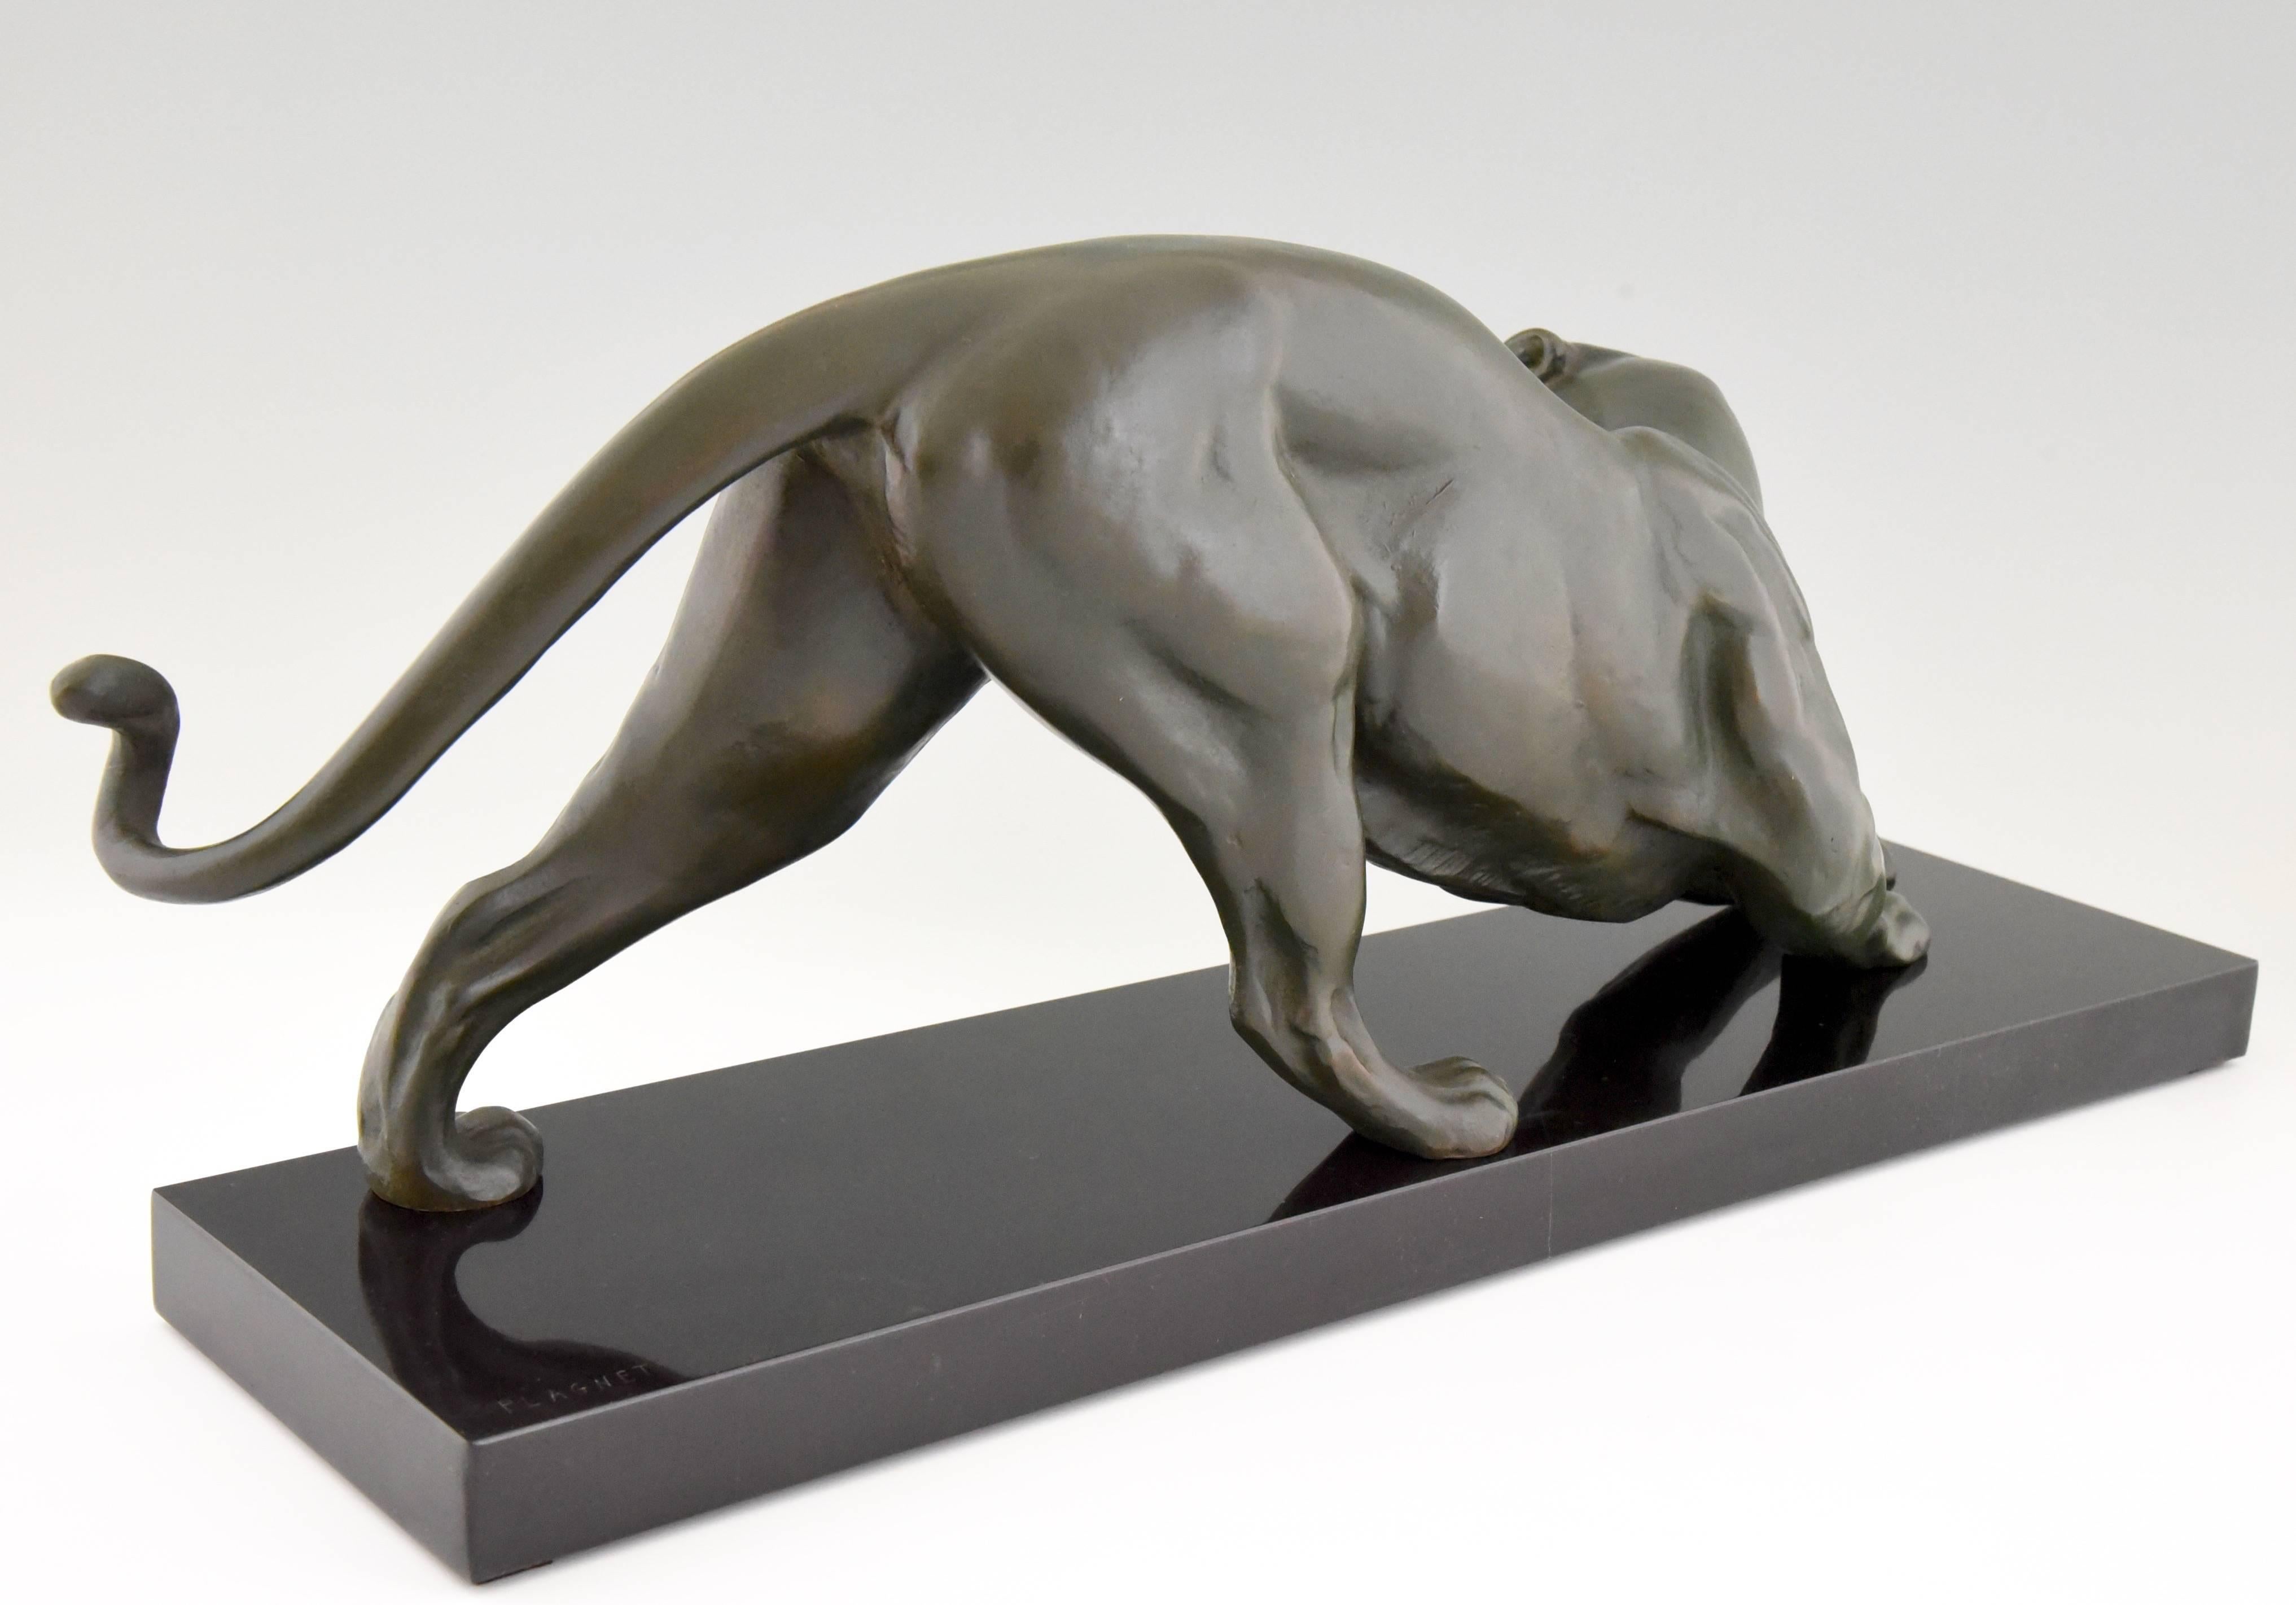 20th Century French Art Deco Panther Sculpture by Plagnet, 1930